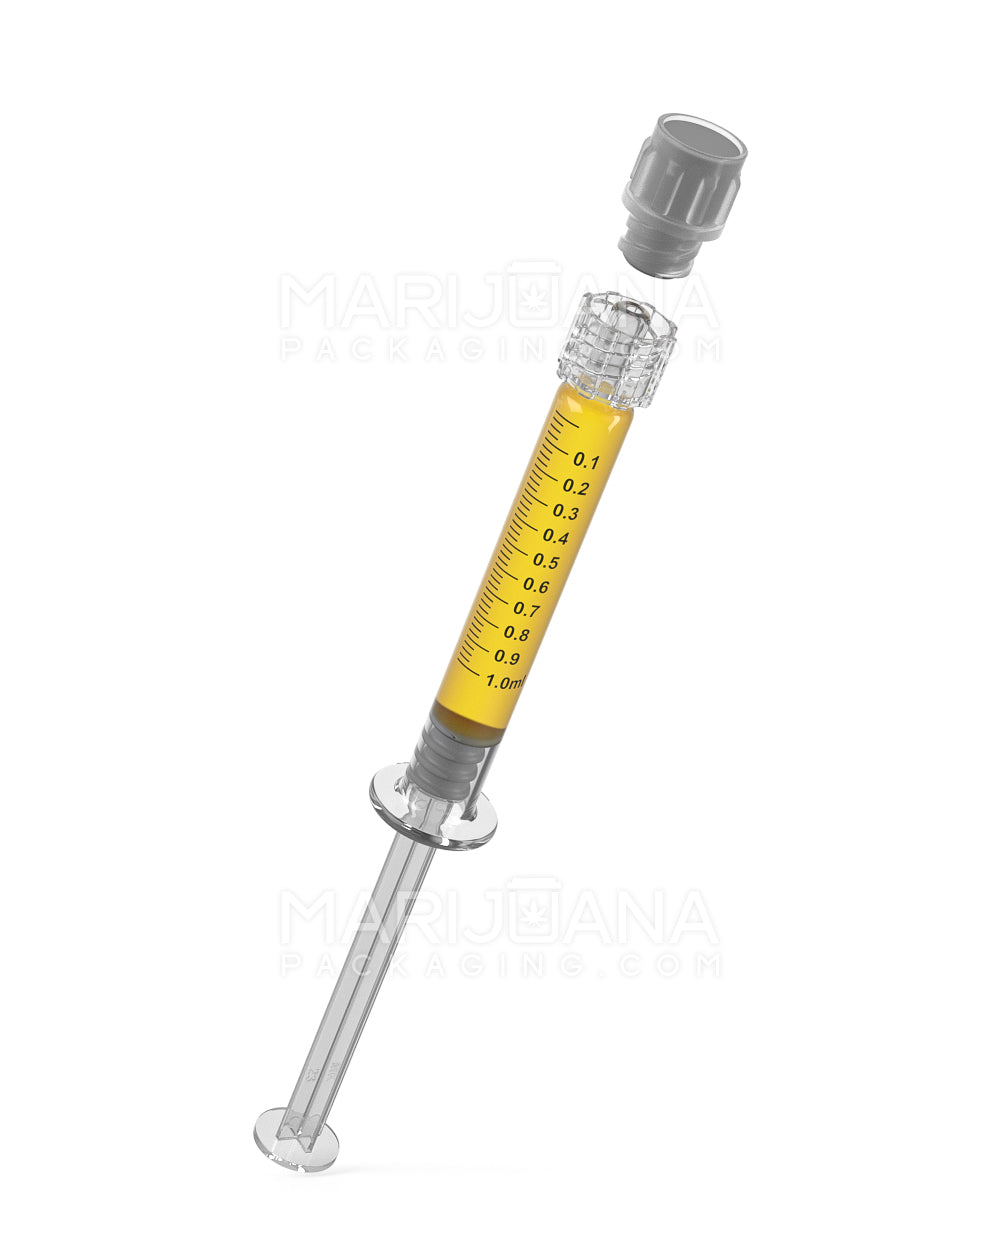 Luer Lock | Long Glass Dab Applicator Syringes | 1mL - 0.1mL Increments - 100 Count - 6